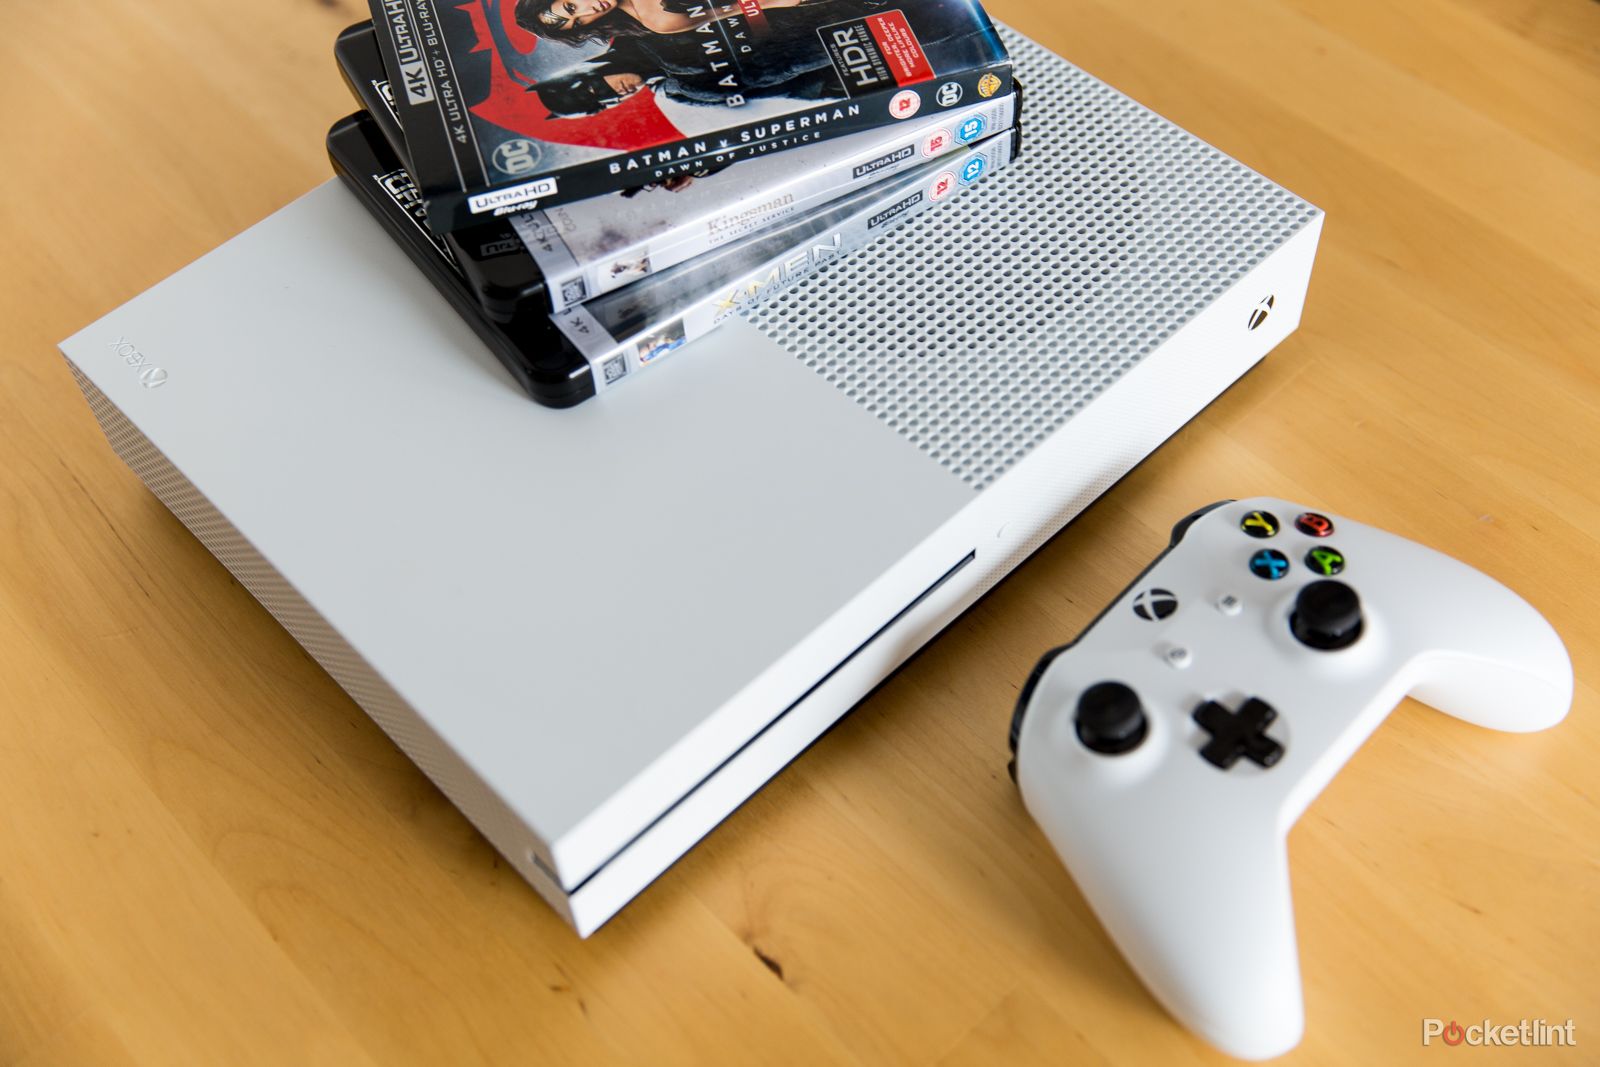 heelal Indiener Maxim Xbox One S review: Great console and 4K Blu-ray player